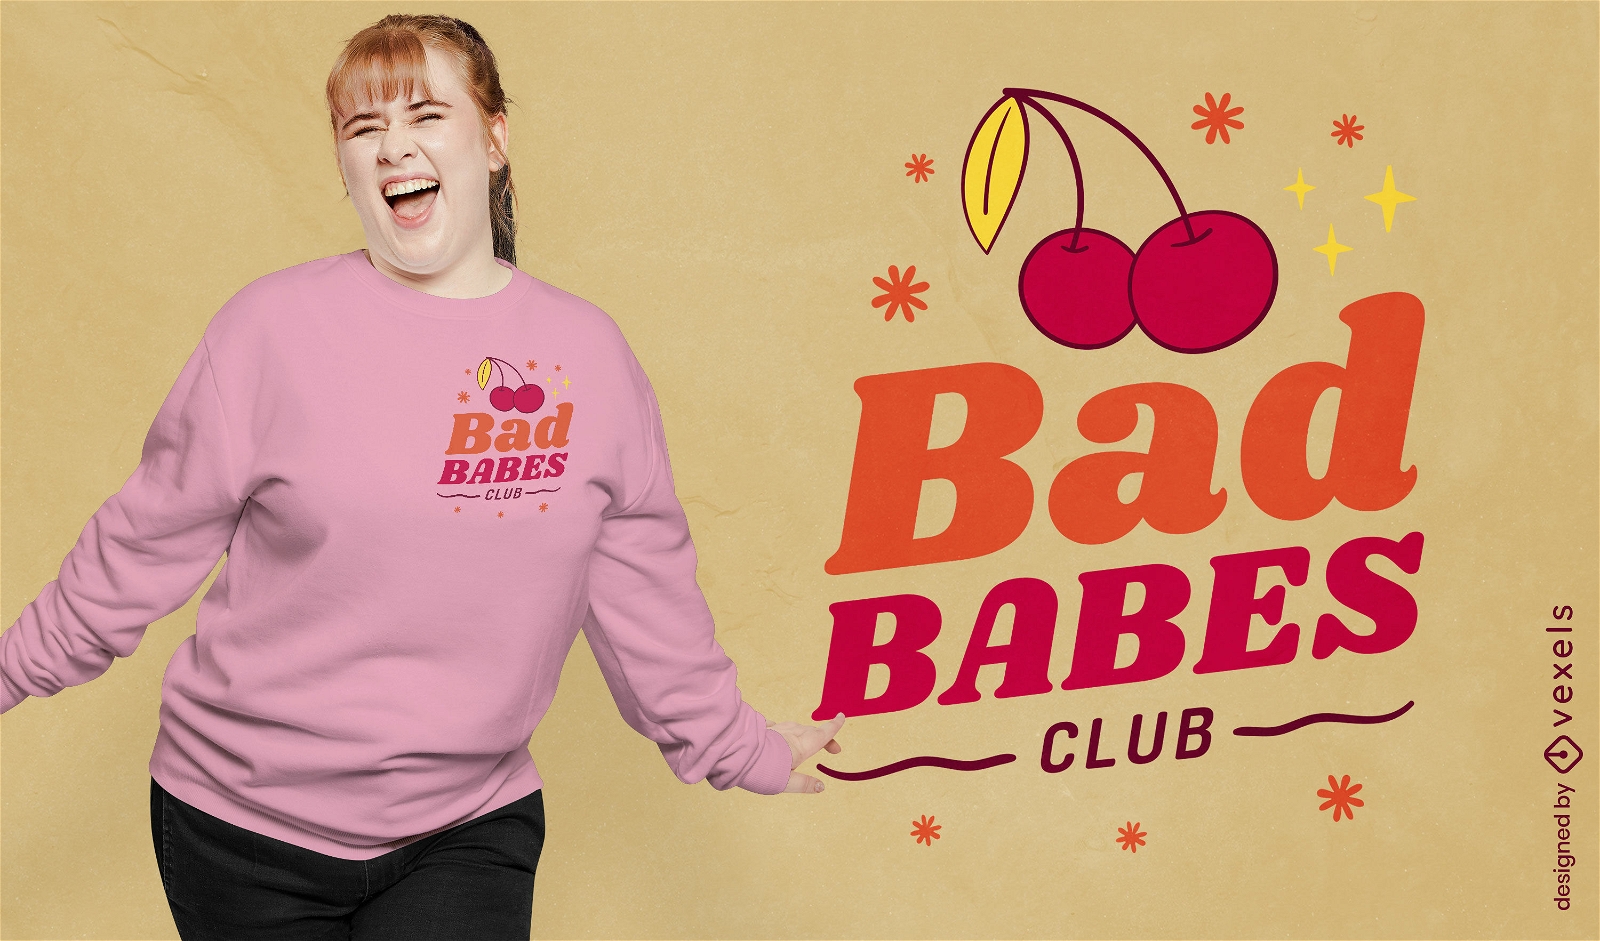 Bad babes 2000s quote t-shirt design